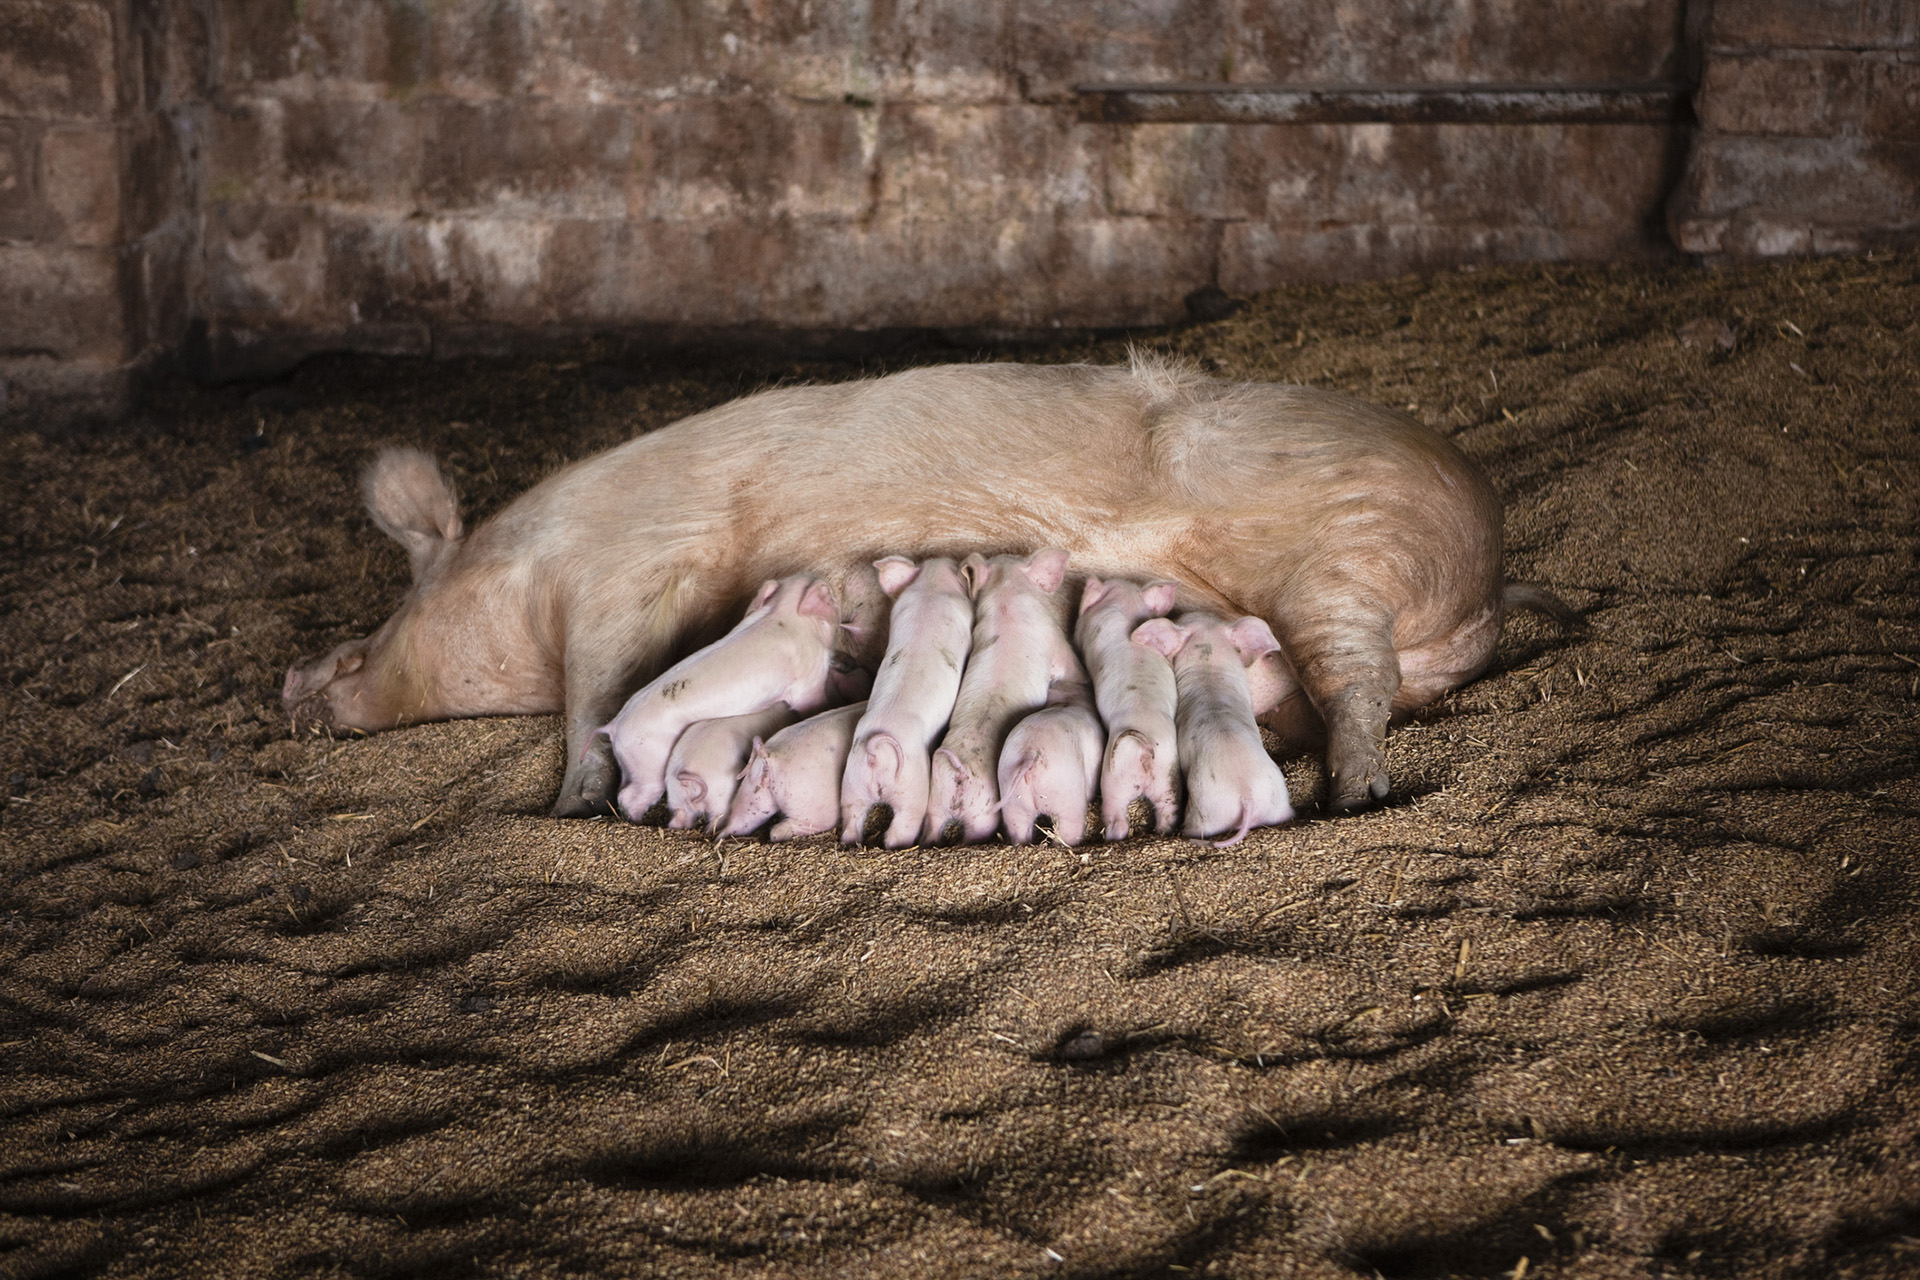 A sow and piglets